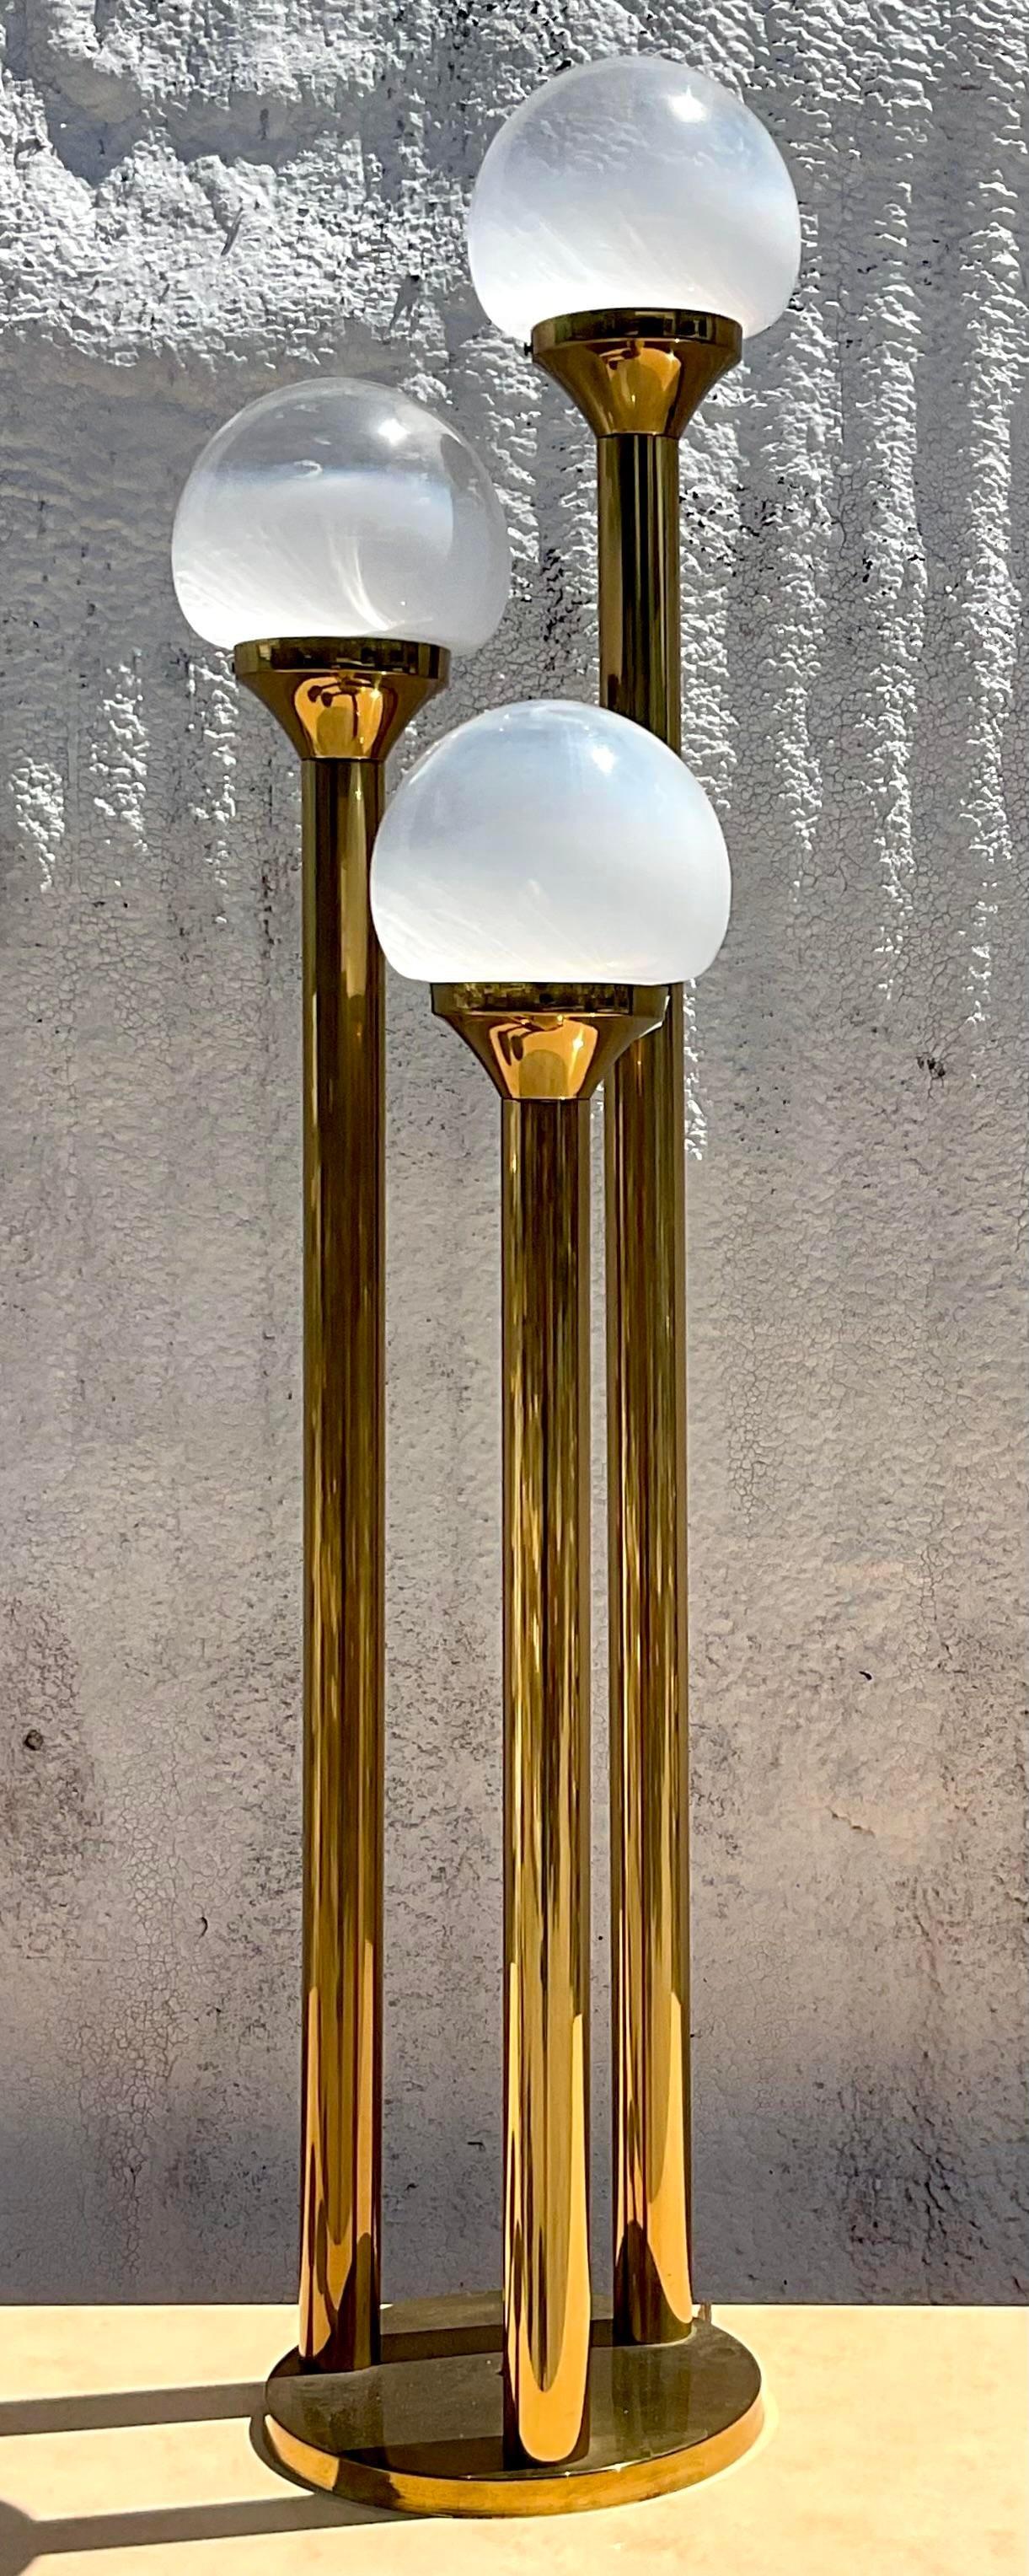 Crafted in the Tradition of Italian Artistry: After the Vintage Mezzaga Murano Three Globe Lamp. Infuse your space with European elegance, seamlessly blending with American style for a sophisticated lighting accent that transcends borders 